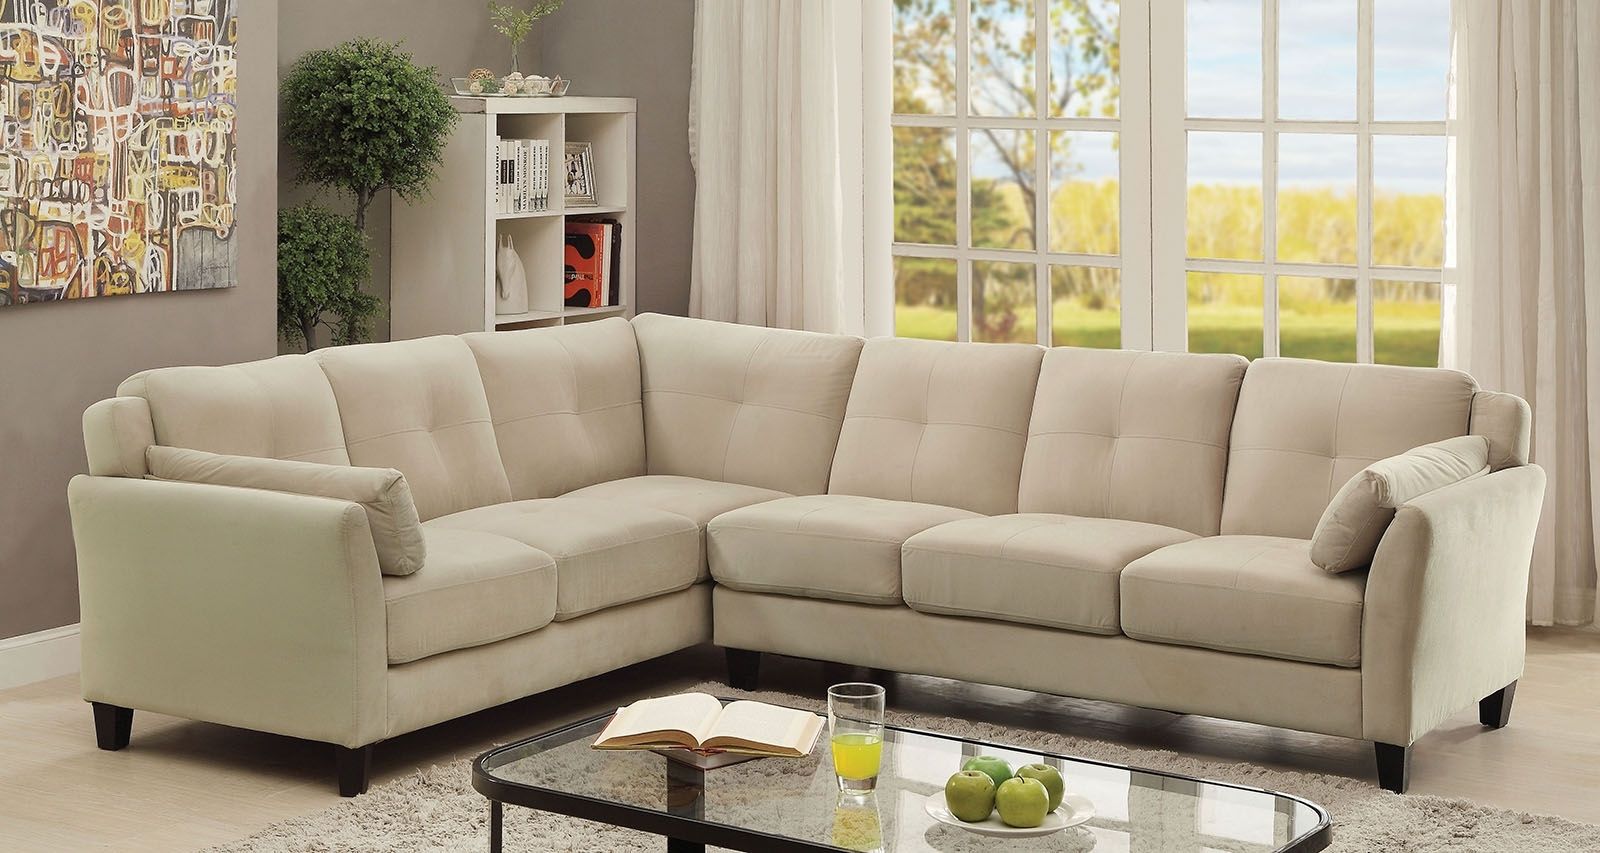 Peever Ii Beige Sectional | Andrew's Furniture And Mattress With Beige Sectional Sofas (Photo 3 of 15)